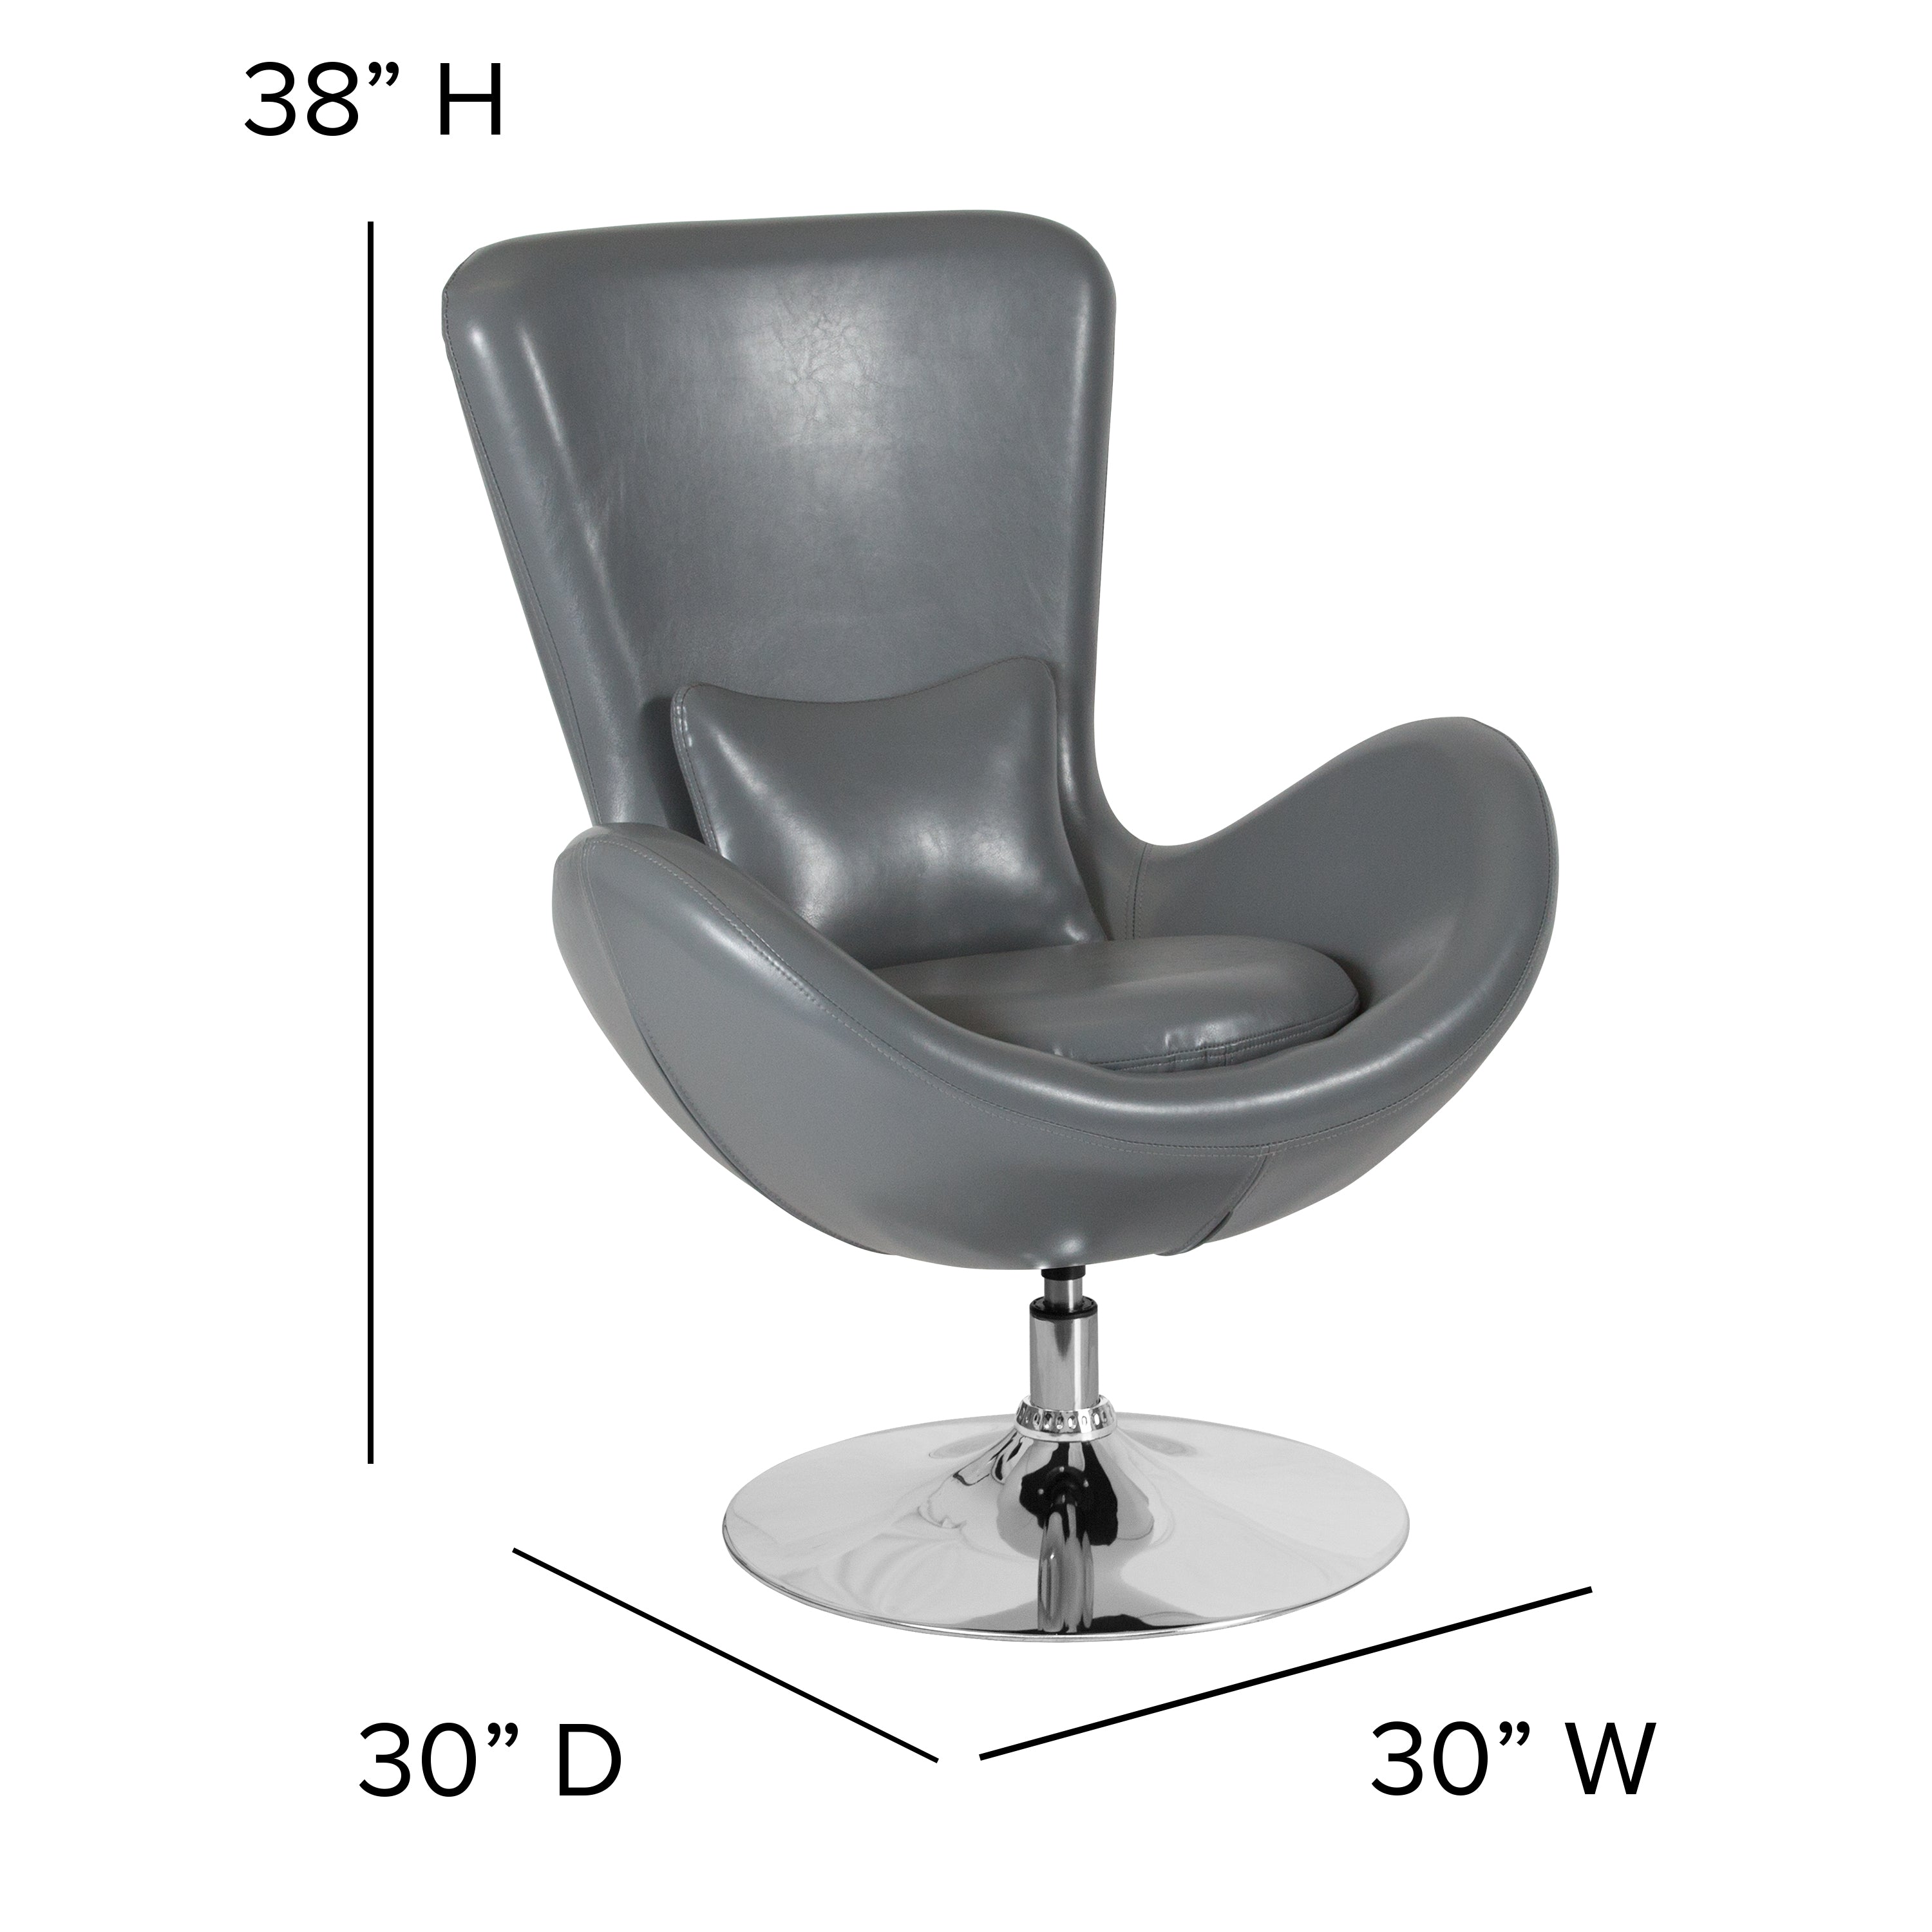 Egg Series Side Reception Chair with Bowed Seat-Egg Chair-Flash Furniture-Wall2Wall Furnishings